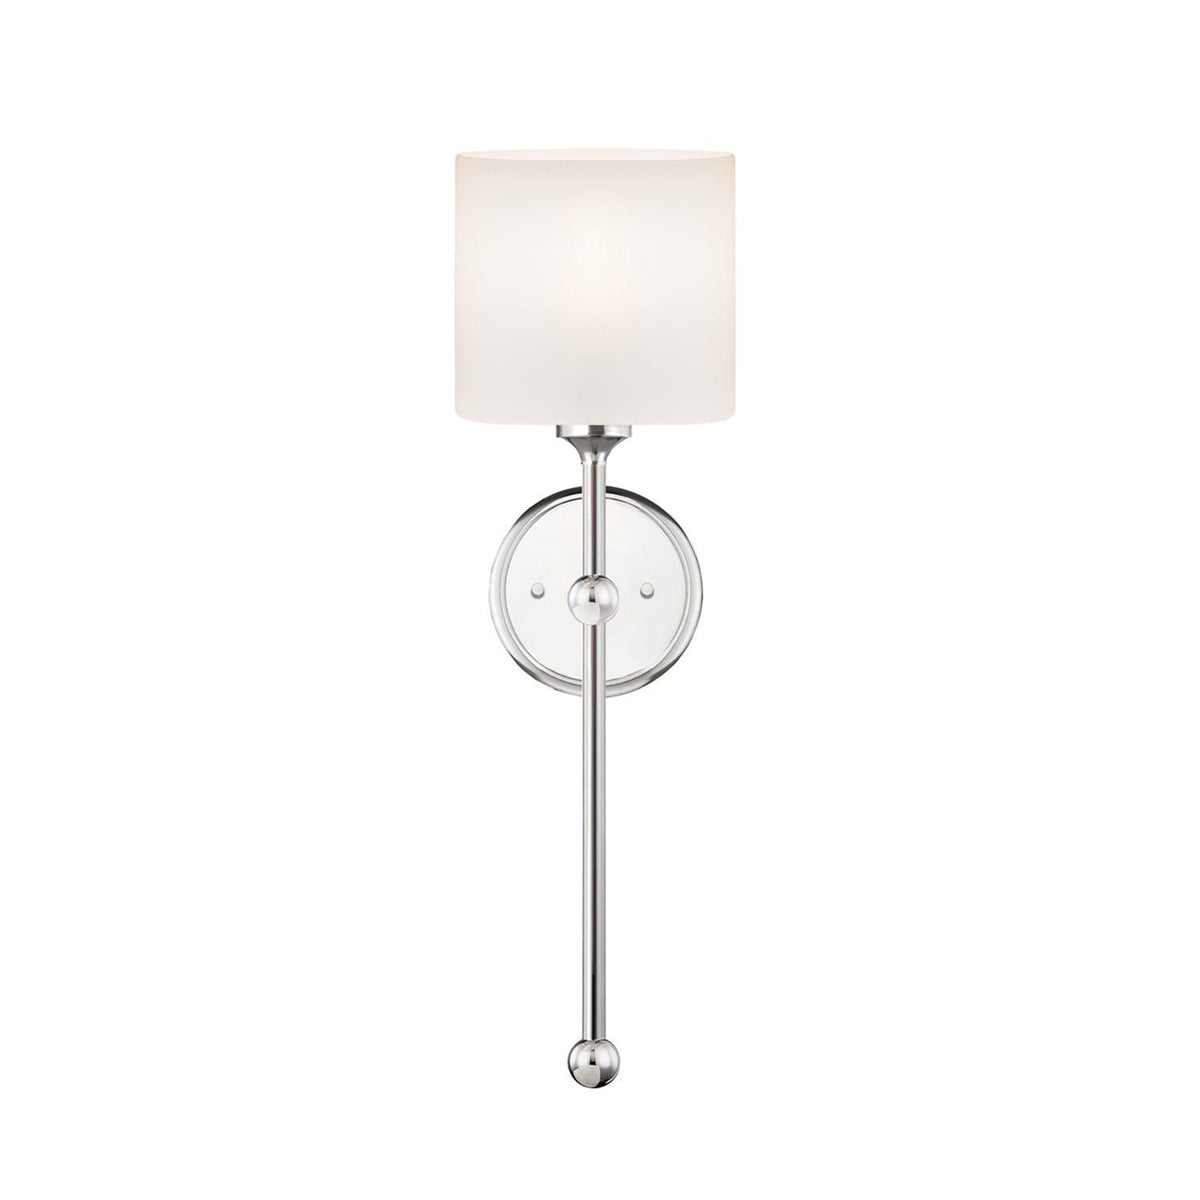 Justice Designs - Sequoia Wall Sconce - FSN-4331-OPAL-MBLK | Montreal Lighting & Hardware